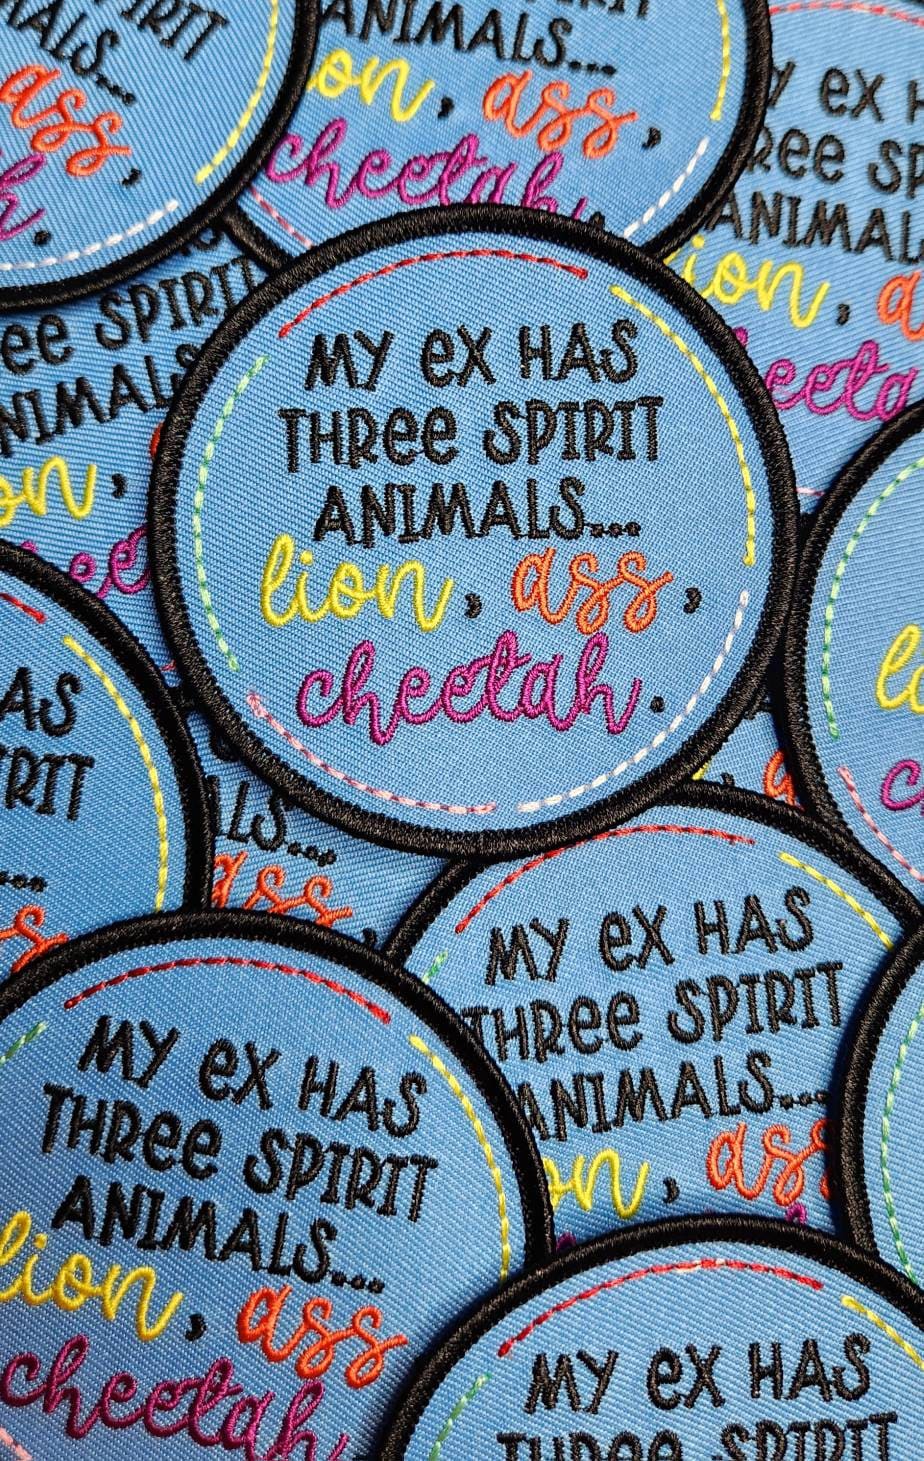 Funny Patch, 1-pc "My Ex Has Three Spirit Animals" Circular Statement Patch, Size 3", Hotfix Patch for Clothing, Colorful & Vibrant